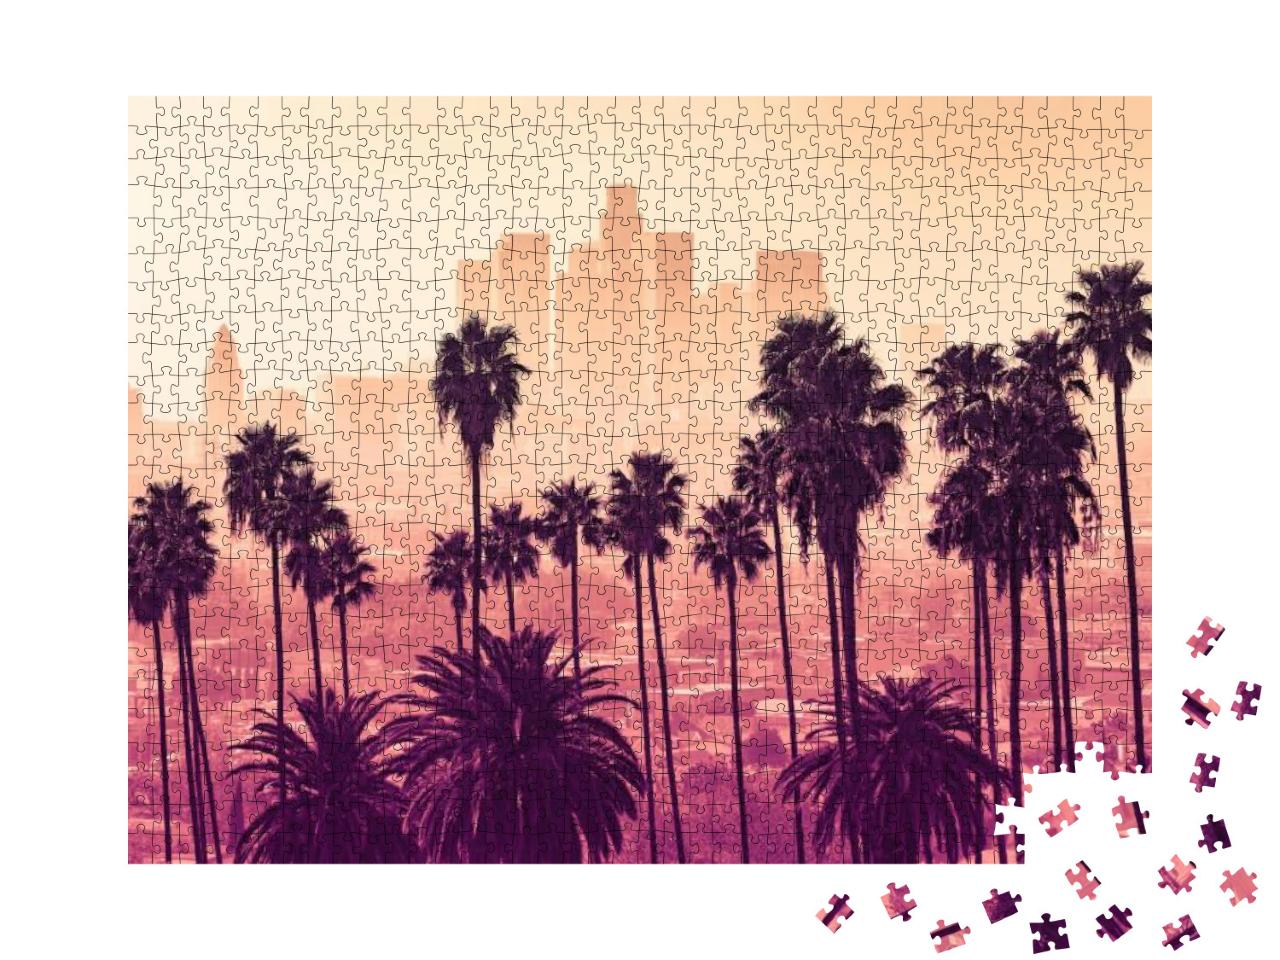 Los Angeles Skyline with Palm Trees in the Foreground... Jigsaw Puzzle with 1000 pieces